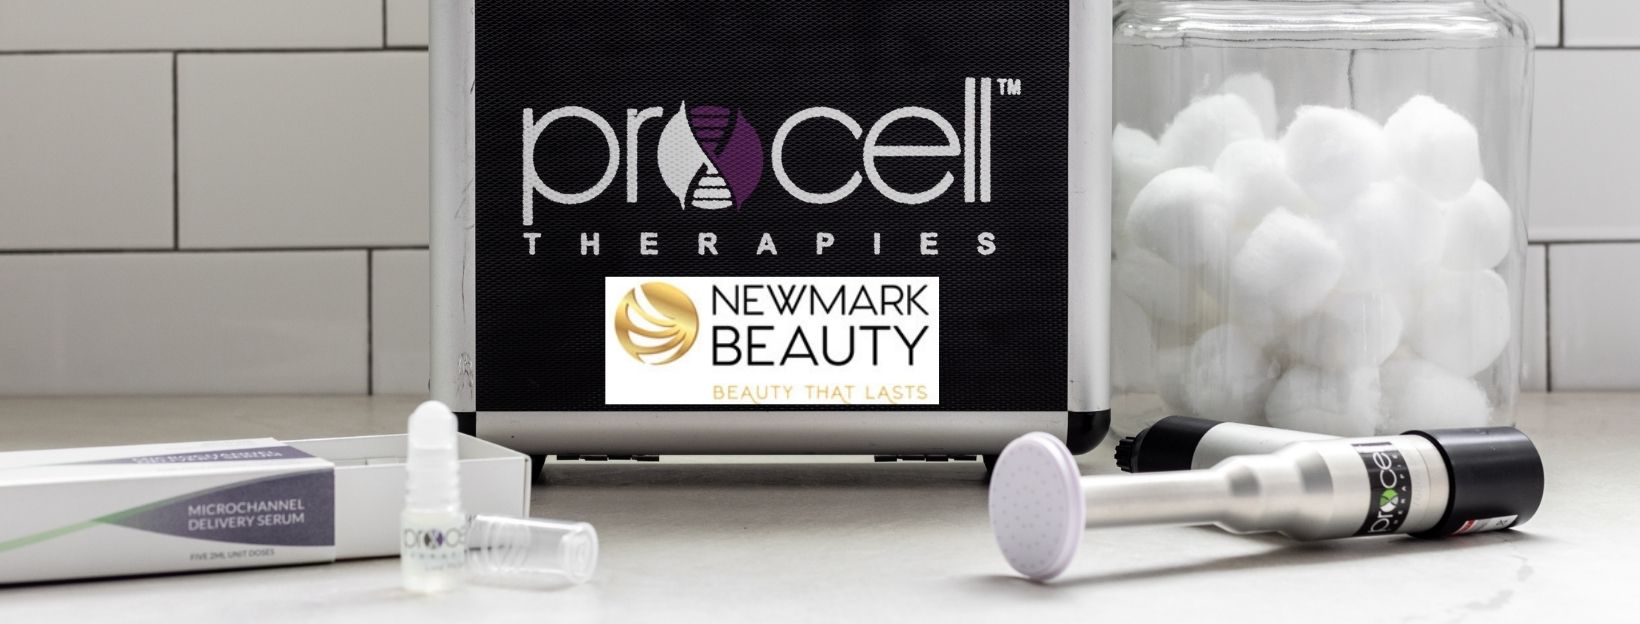 NewMark Beauty Leads The Way in ProCell Therapies Training